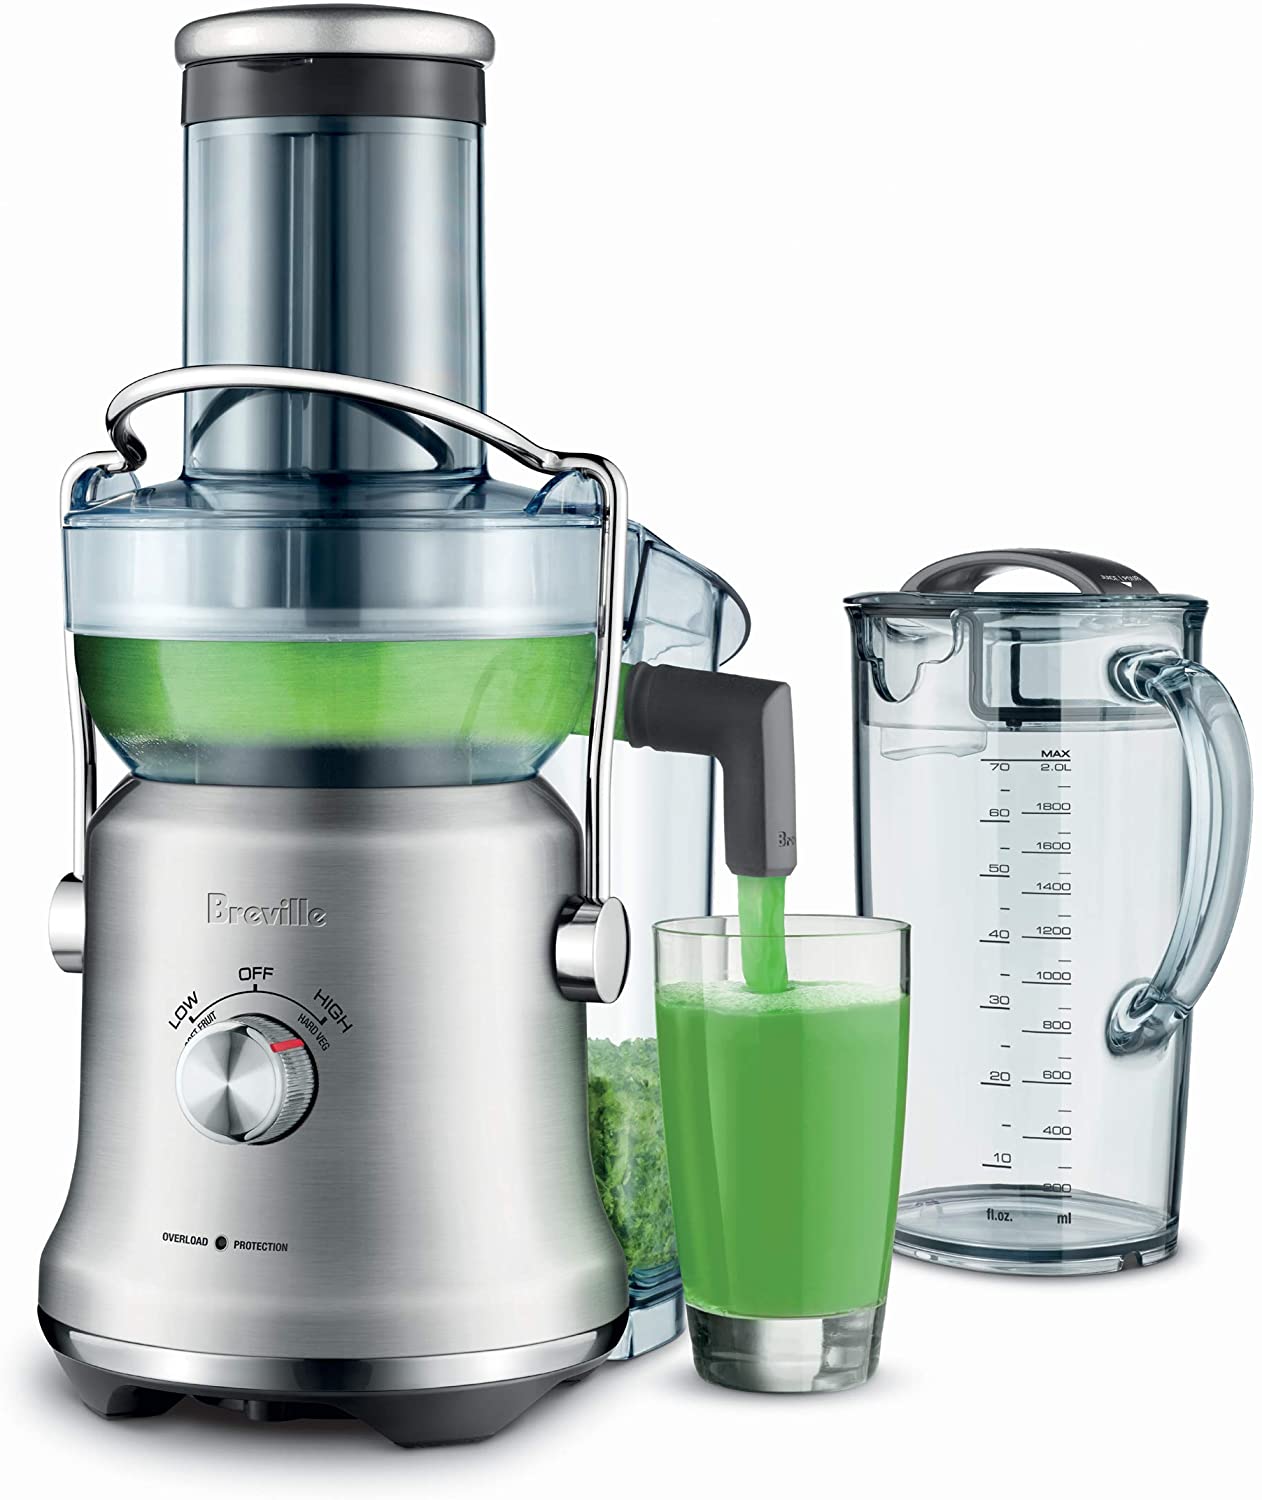 Breville BJE530BSS1BUS1 Countertop Centrifugal Juicer